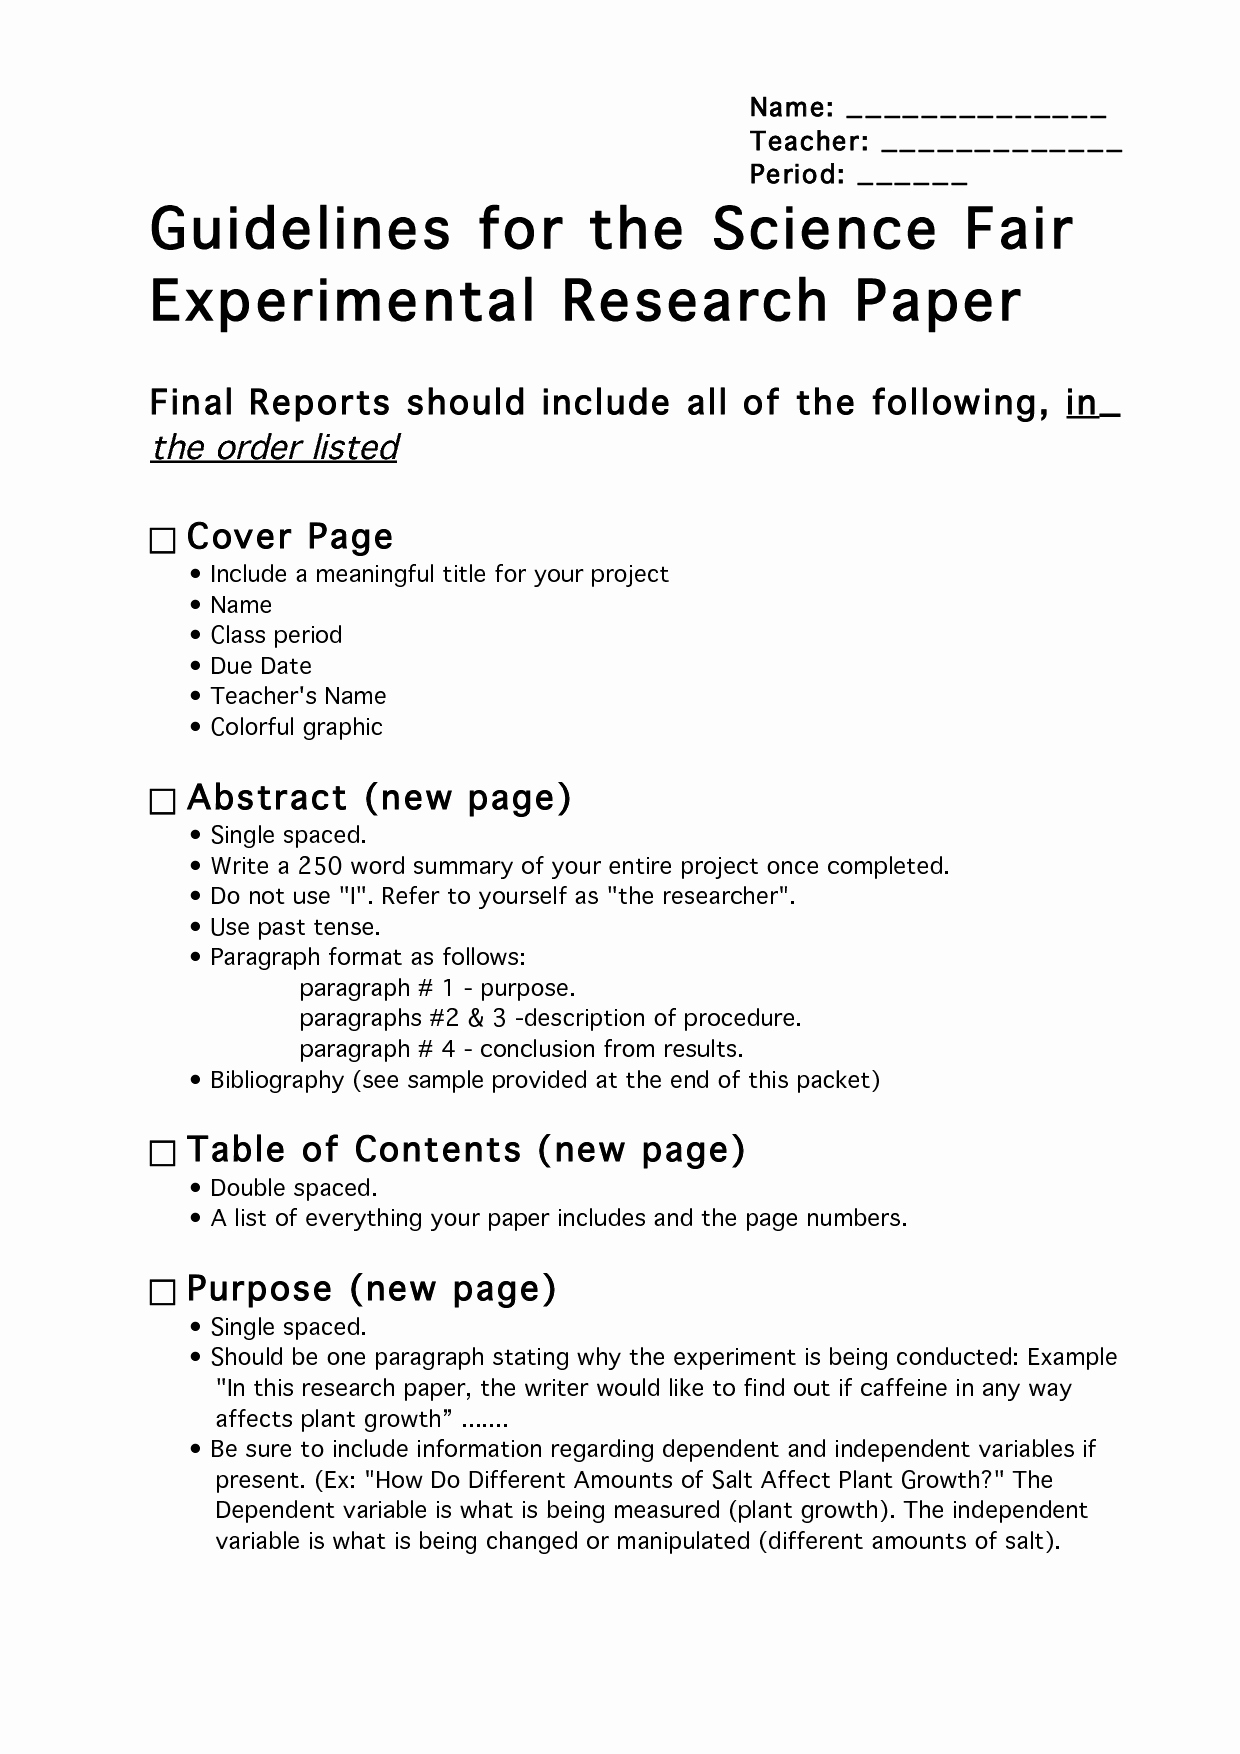 Science Fair Proposal Sheet Fresh Science Fair Research Paper Outline to Pin On